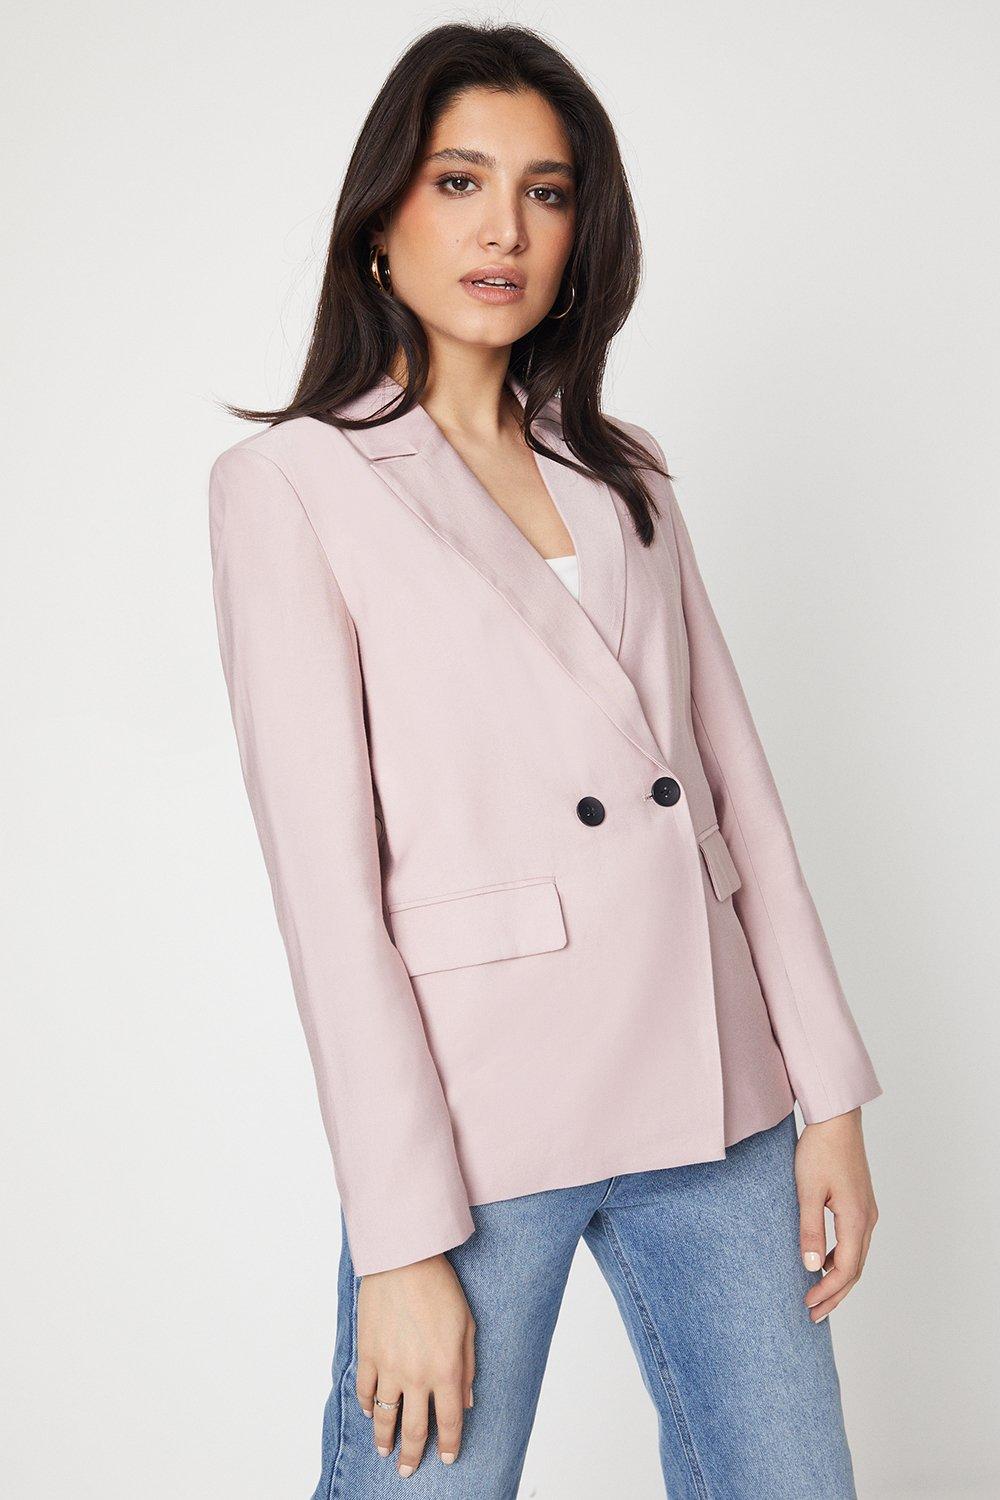 Womens Double Breasted Blazer